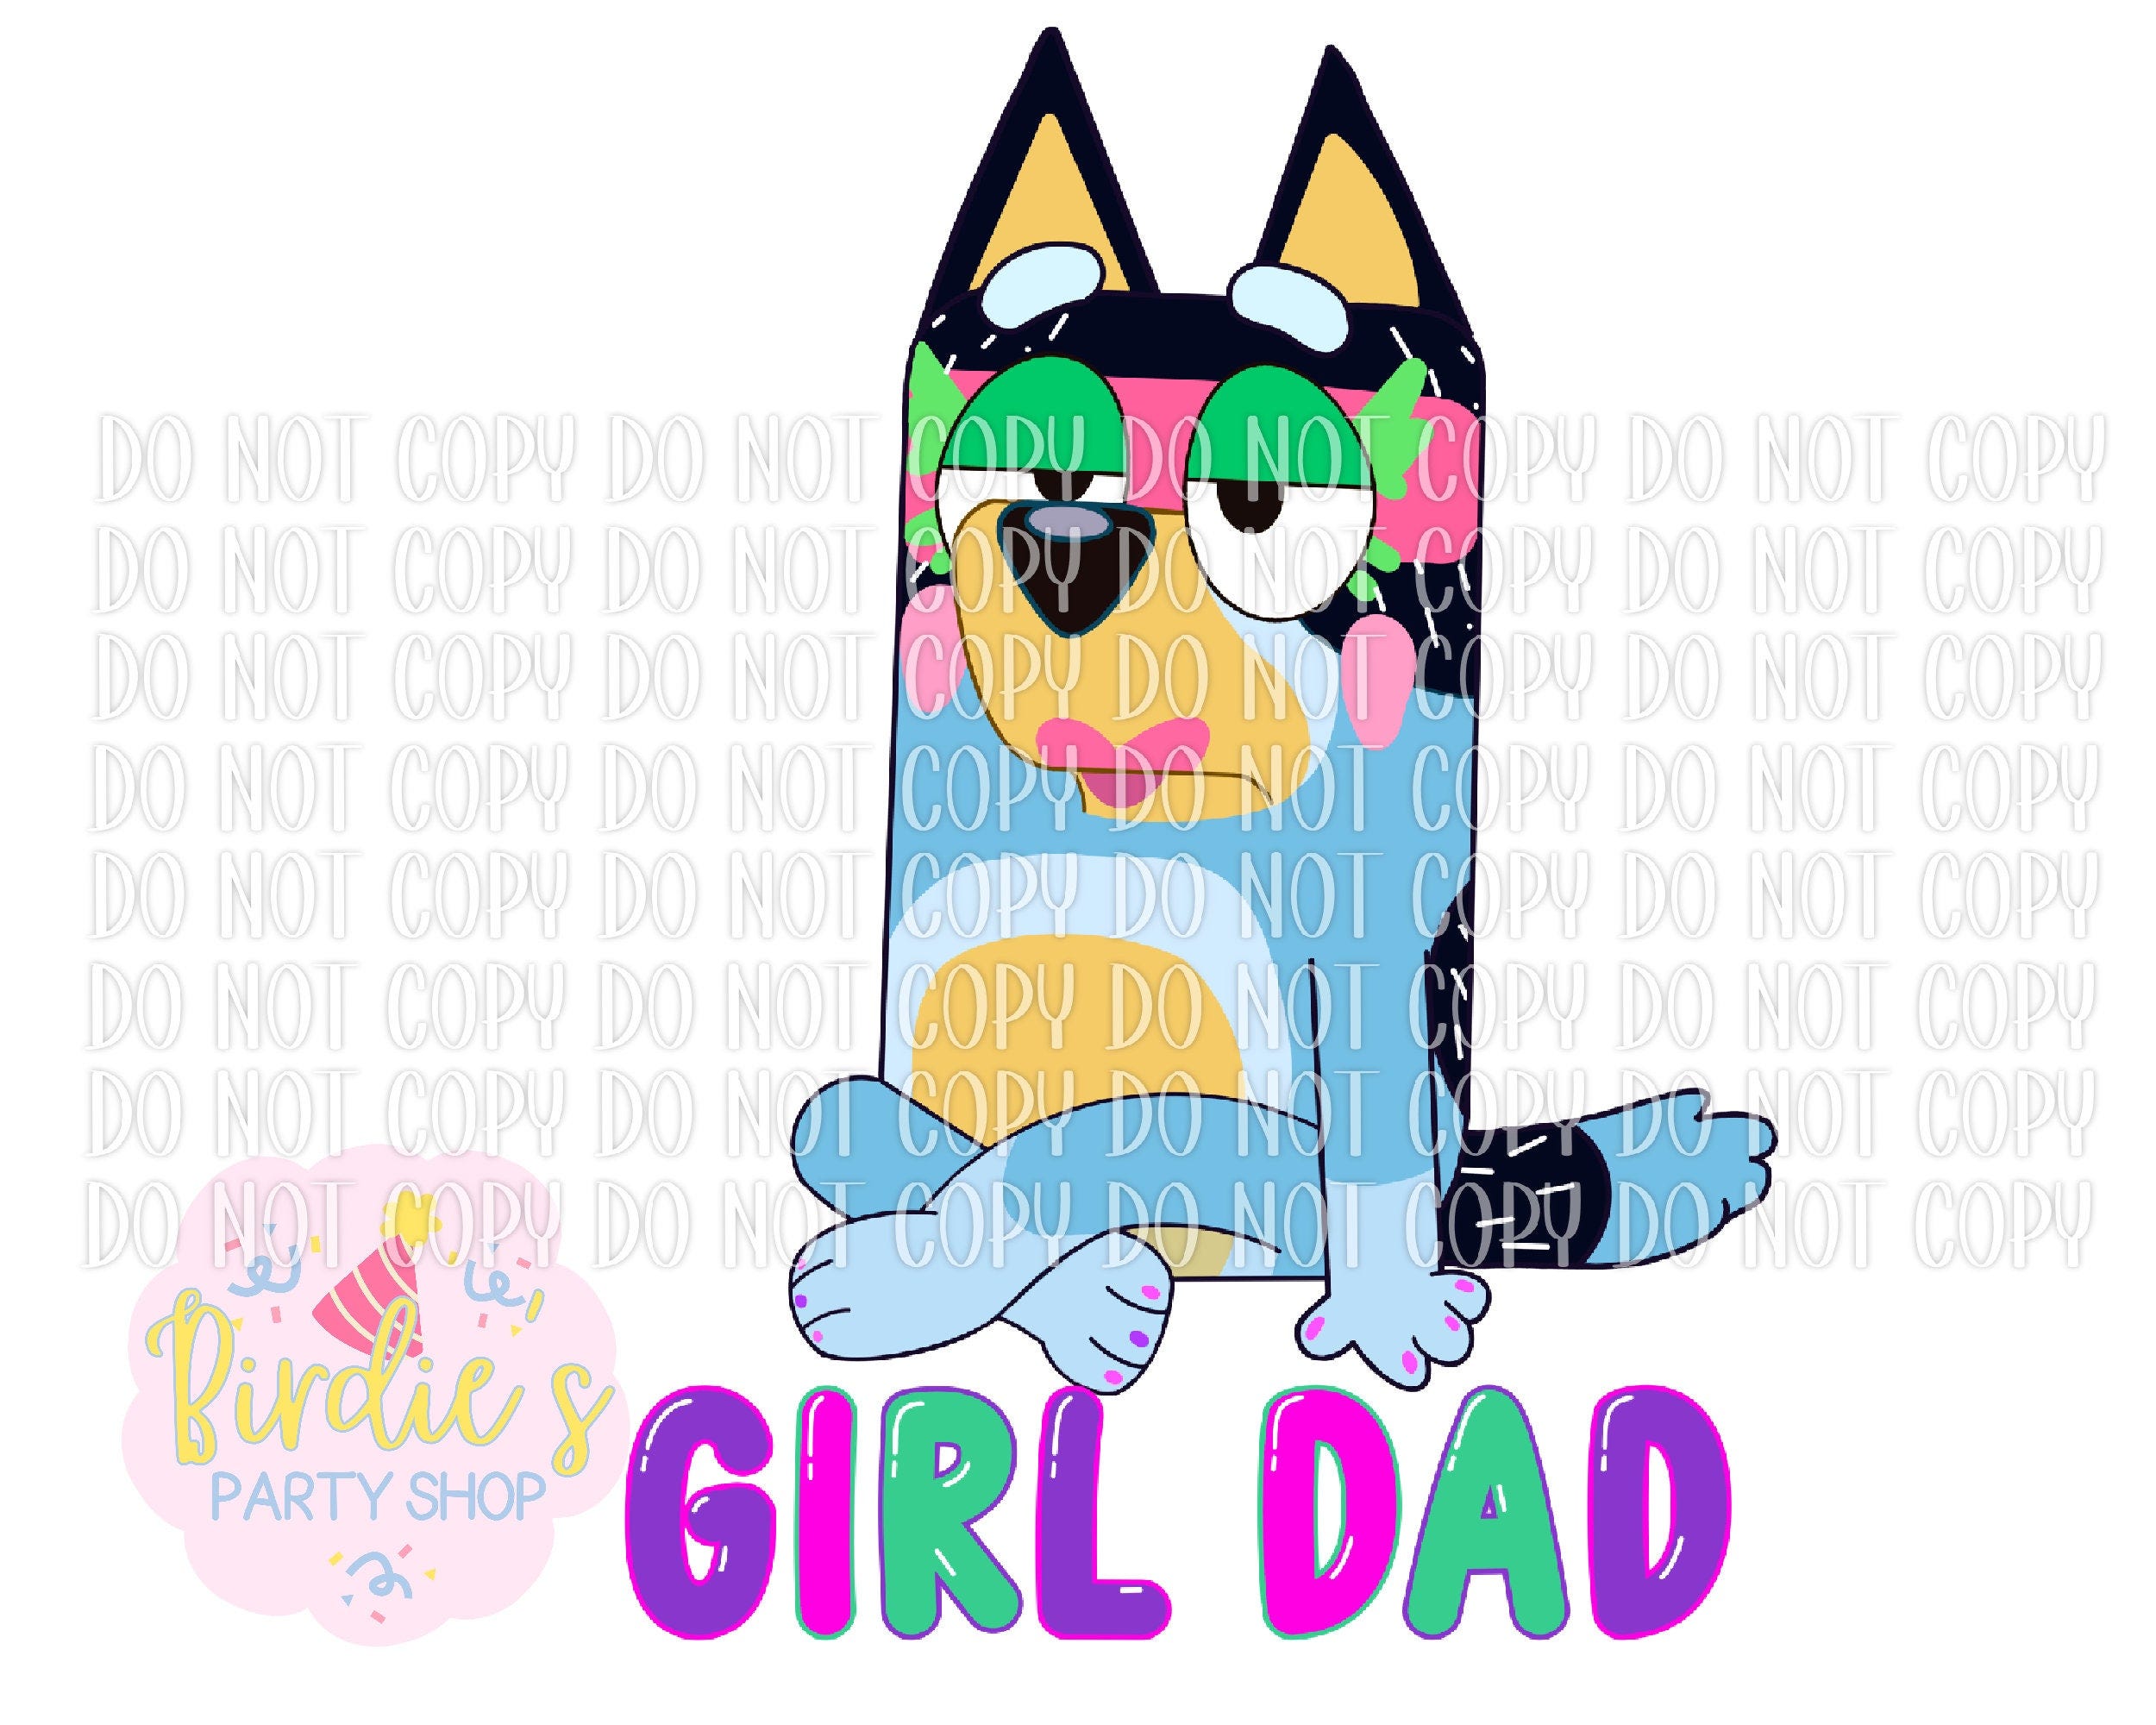 Bluey girl dad t-shirt or sticker design for dtf or sublimation printing. Bandit makeup make up Stickers party supplies decor bingo